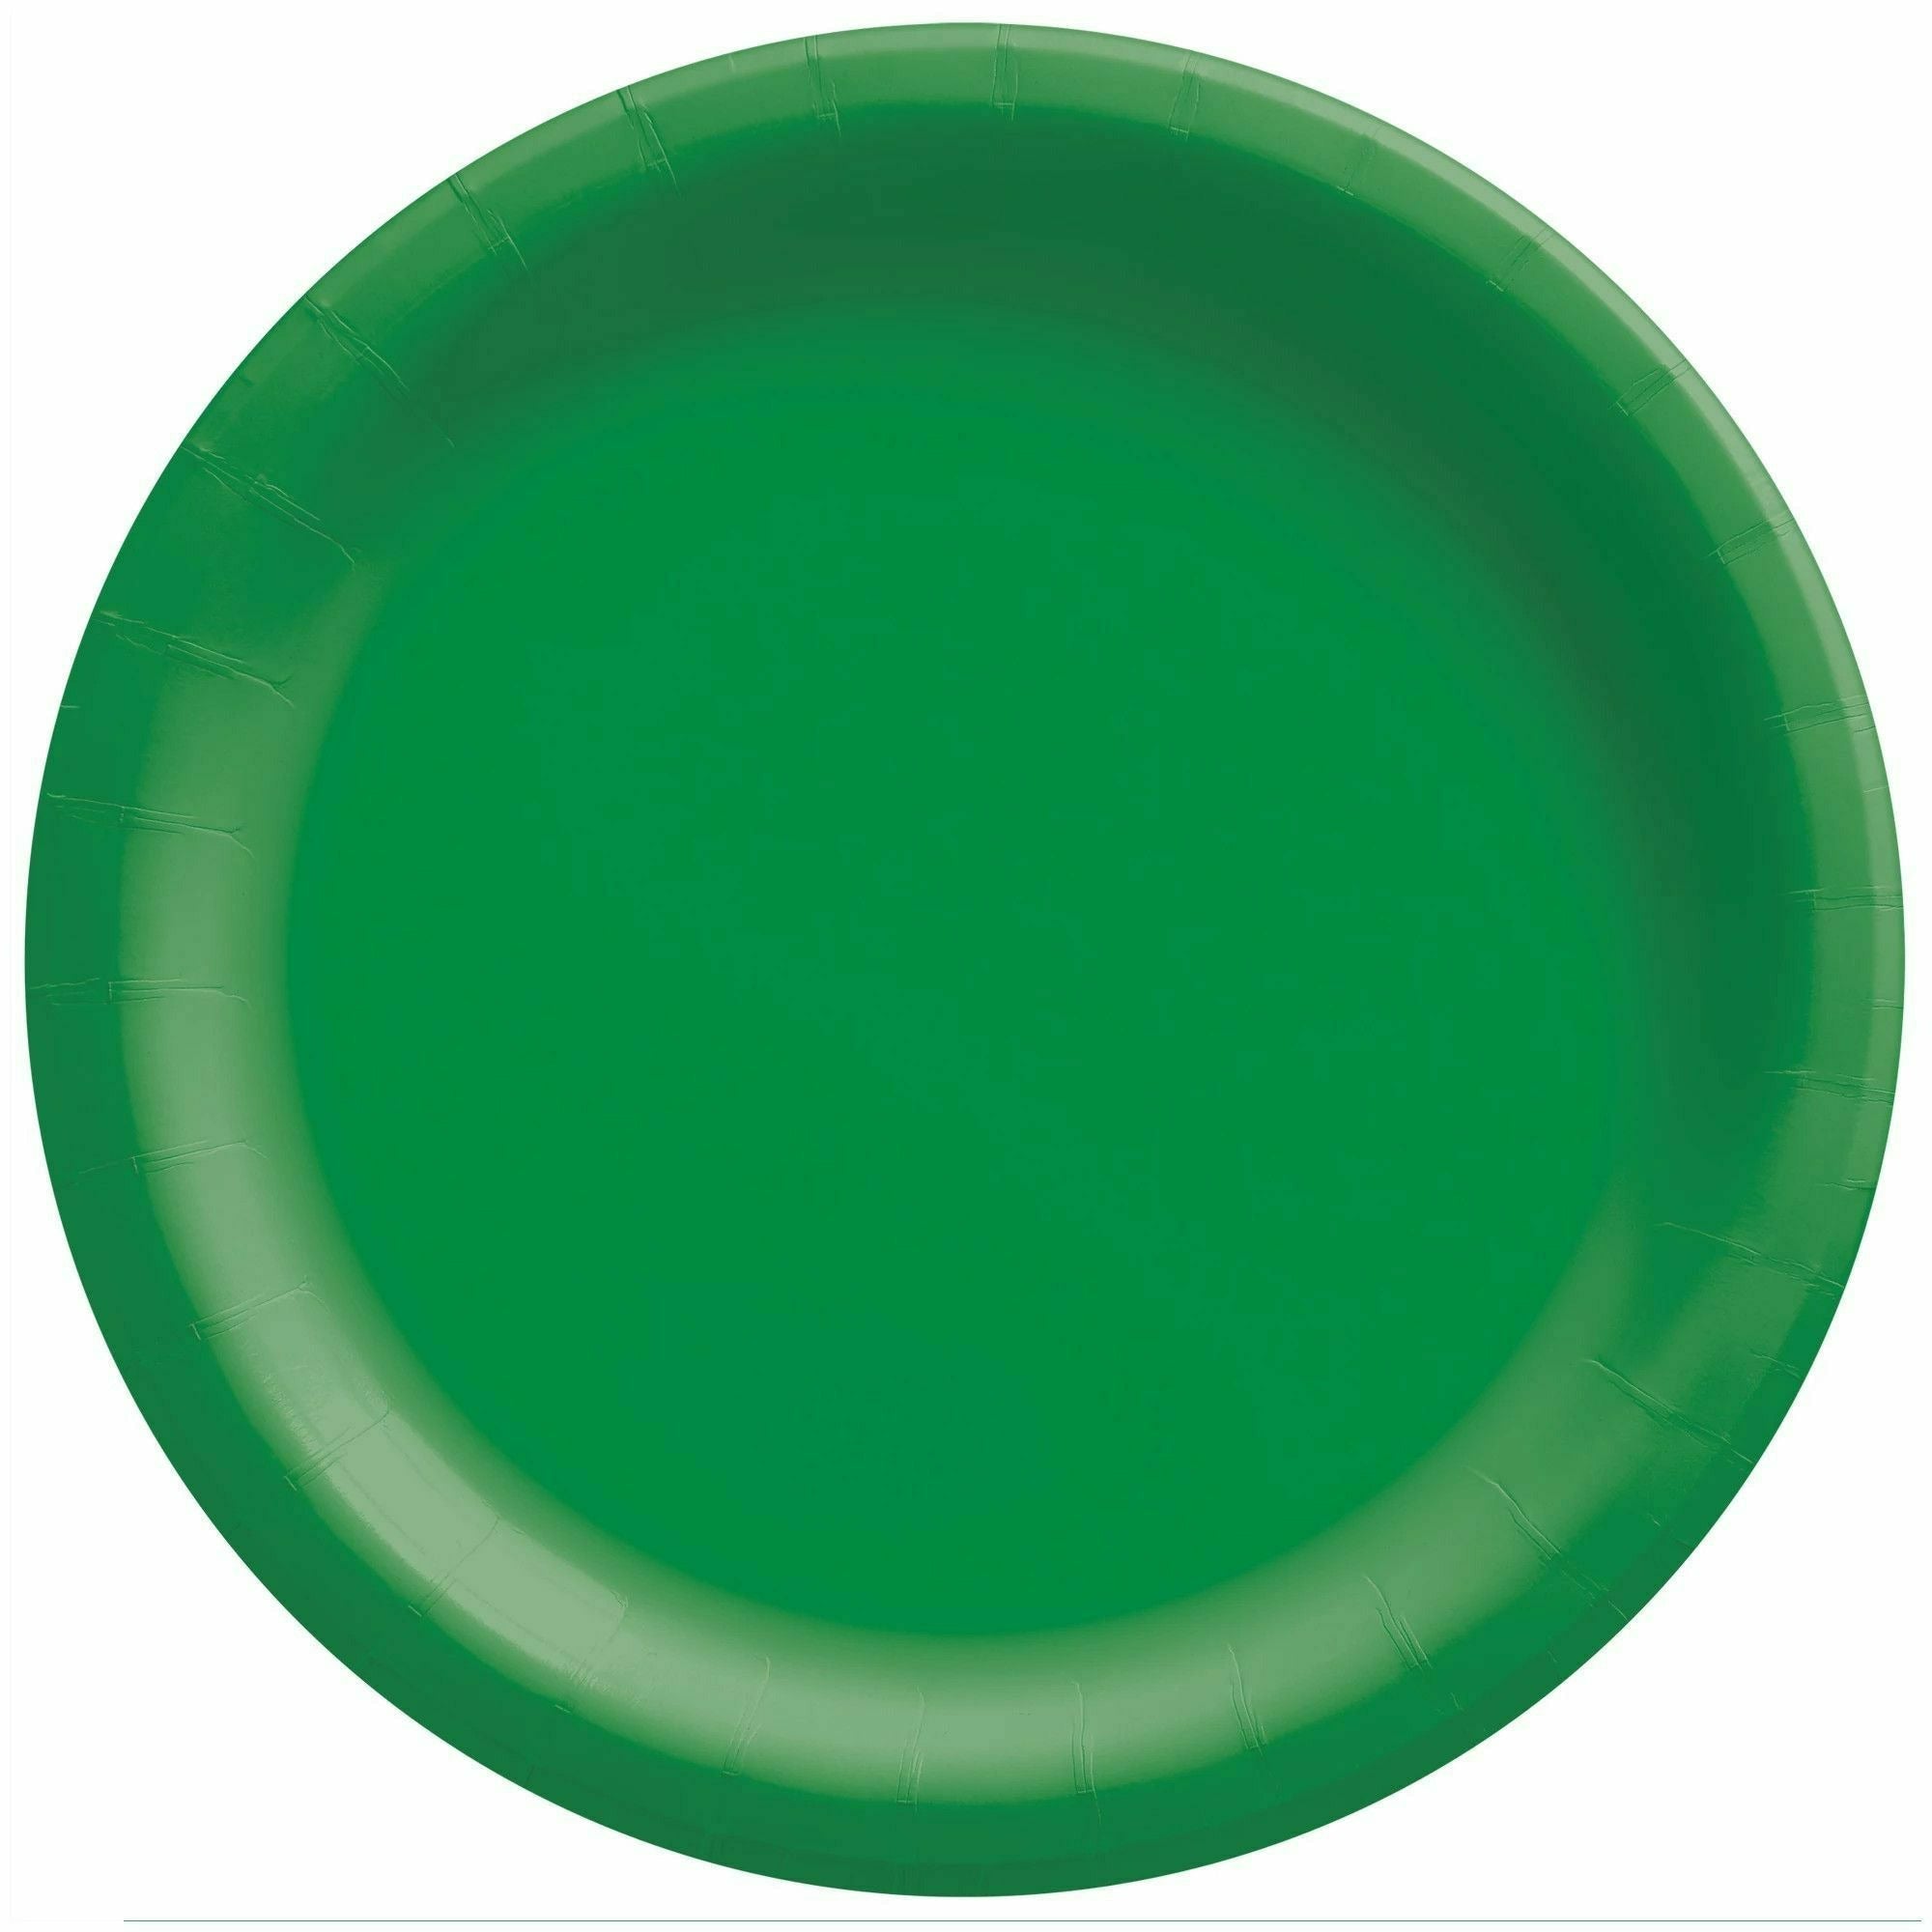 Amscan BASIC Festive Green - 8 1/2" Round Paper Plates, 20 Ct.